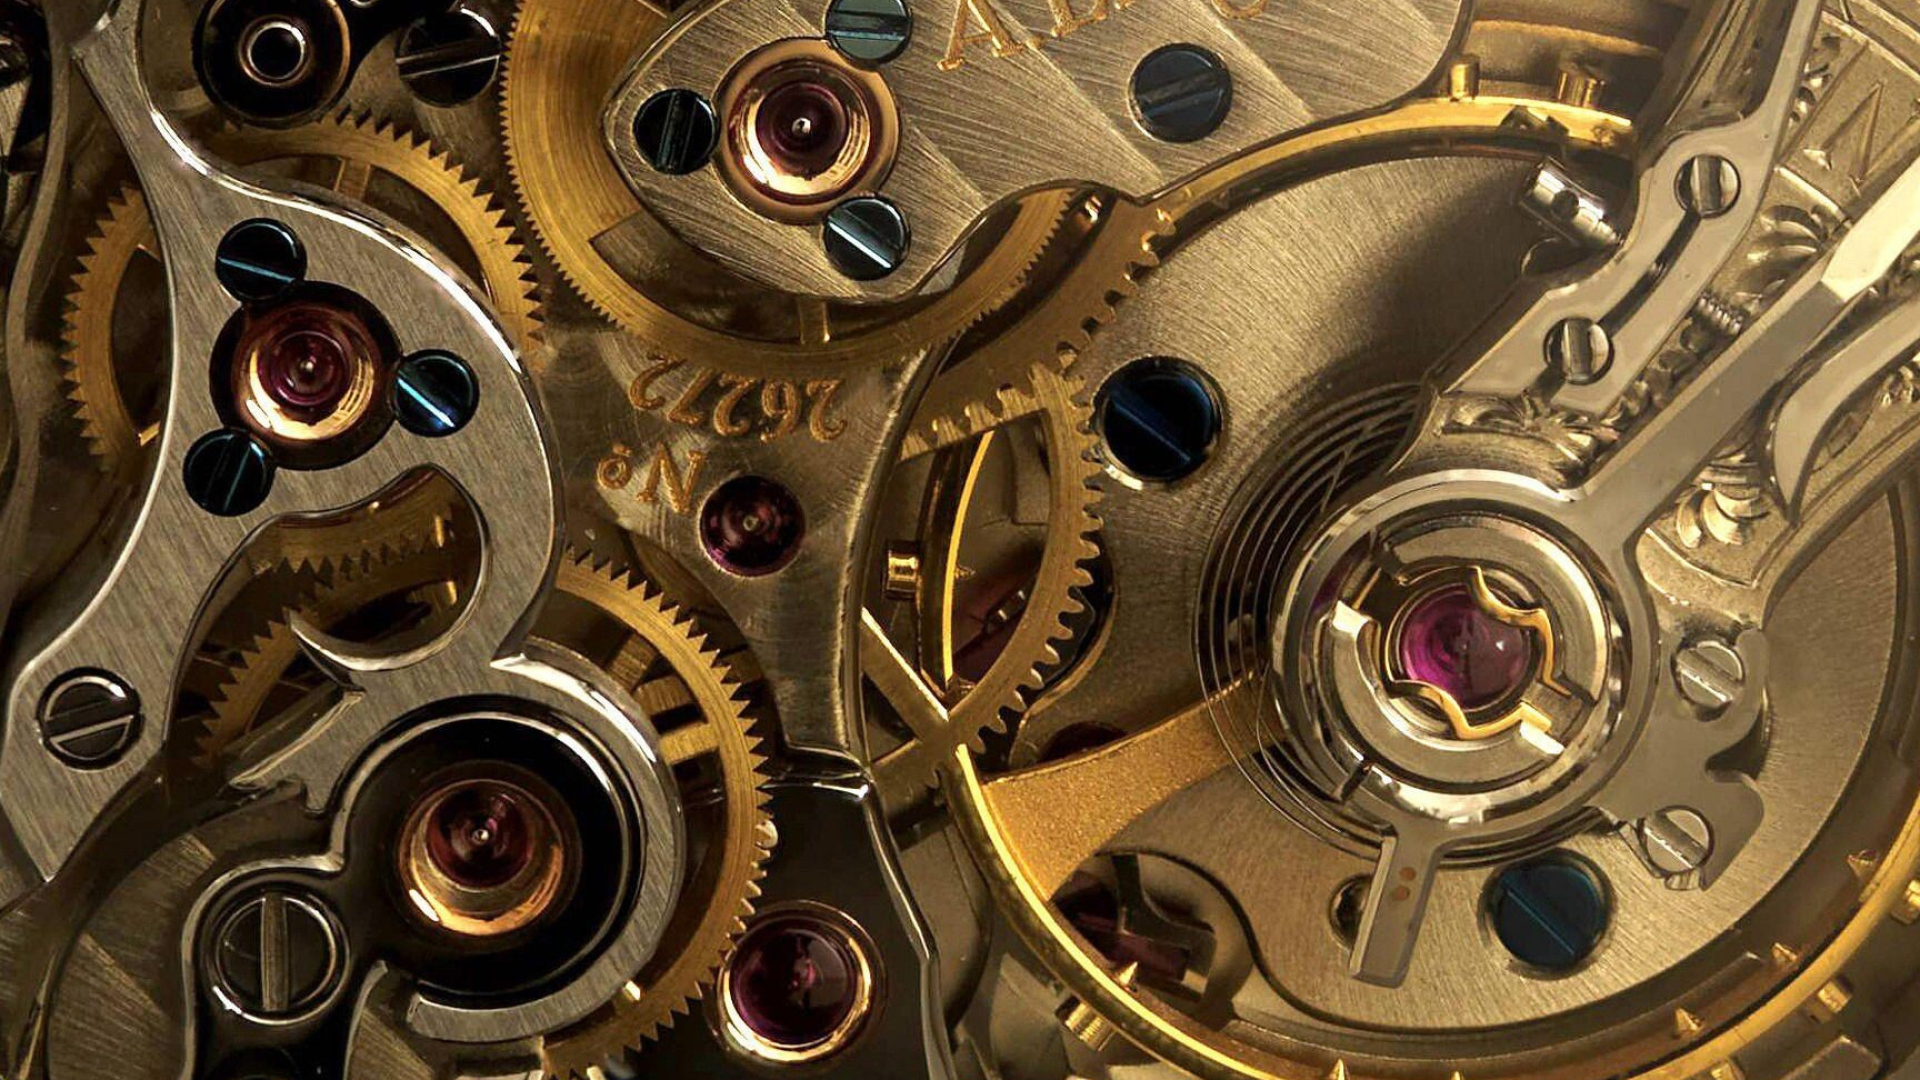 Gear: Clock mechanism, A toothed wheel designed to mesh with another toothed wheel. 1920x1080 Full HD Wallpaper.